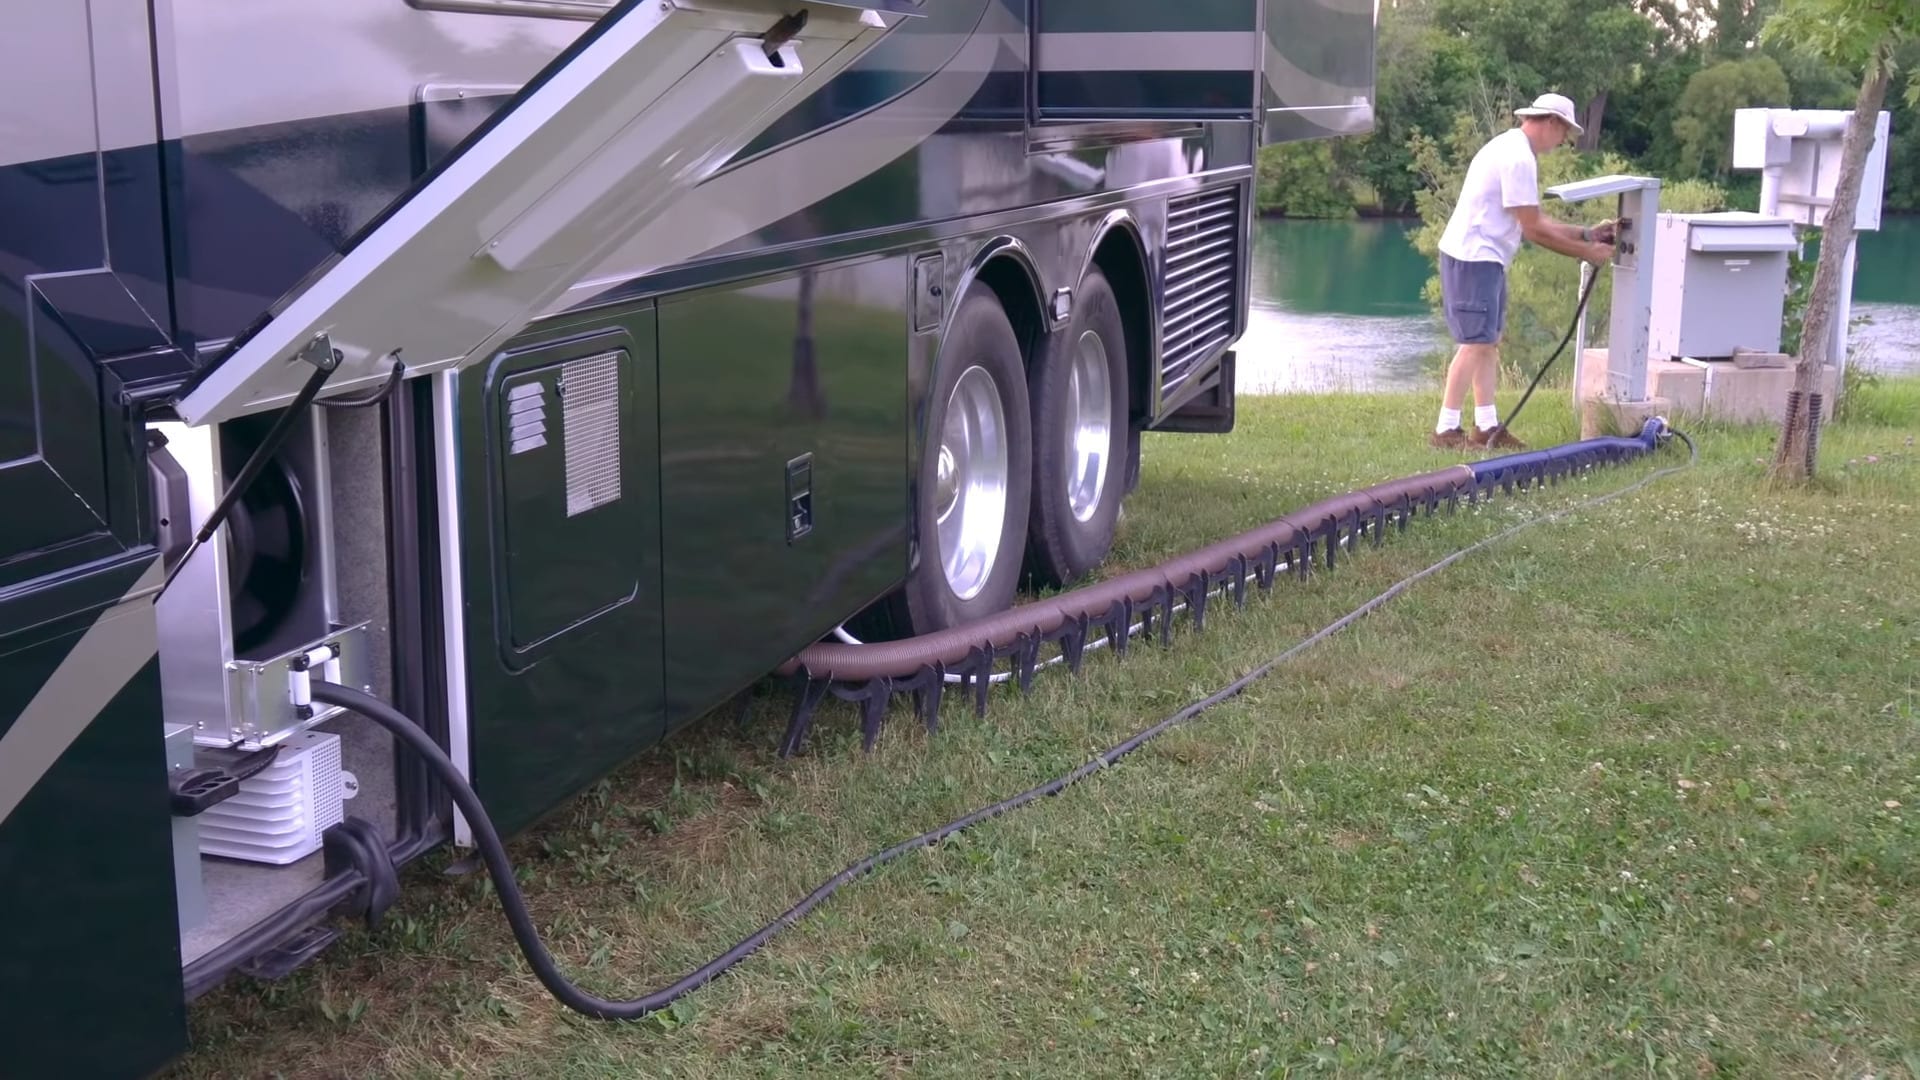 The Best RV Surge Protectors: Protect Your RV’s Electronics!